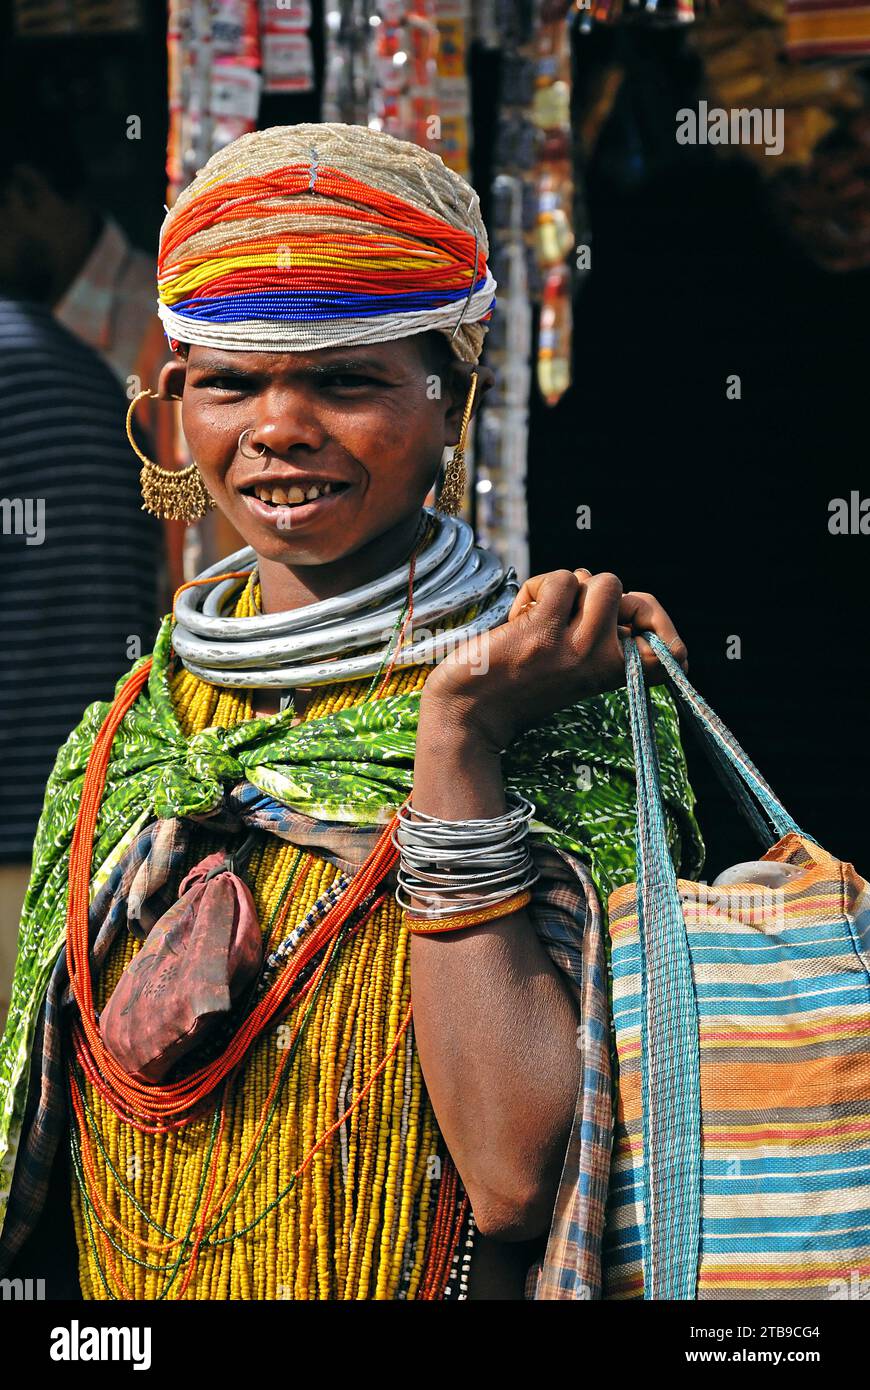 Bondas tribal women going to the Ankudeli market. The Bonda, also known as Remo, are a Munda ethnic group who live in the isolated hill regions of the Malkangiri district of southwestern Odisha, near the junction of the three states of Odisha, Chhattisgarh, and Andhra Pradesh. The tribe is one of the oldest and most primitive in mainland India; their culture has changed little for more than a thousand years. They are one of the 75 Primitive Tribal Groups identified by the Government of India. Stock Photo